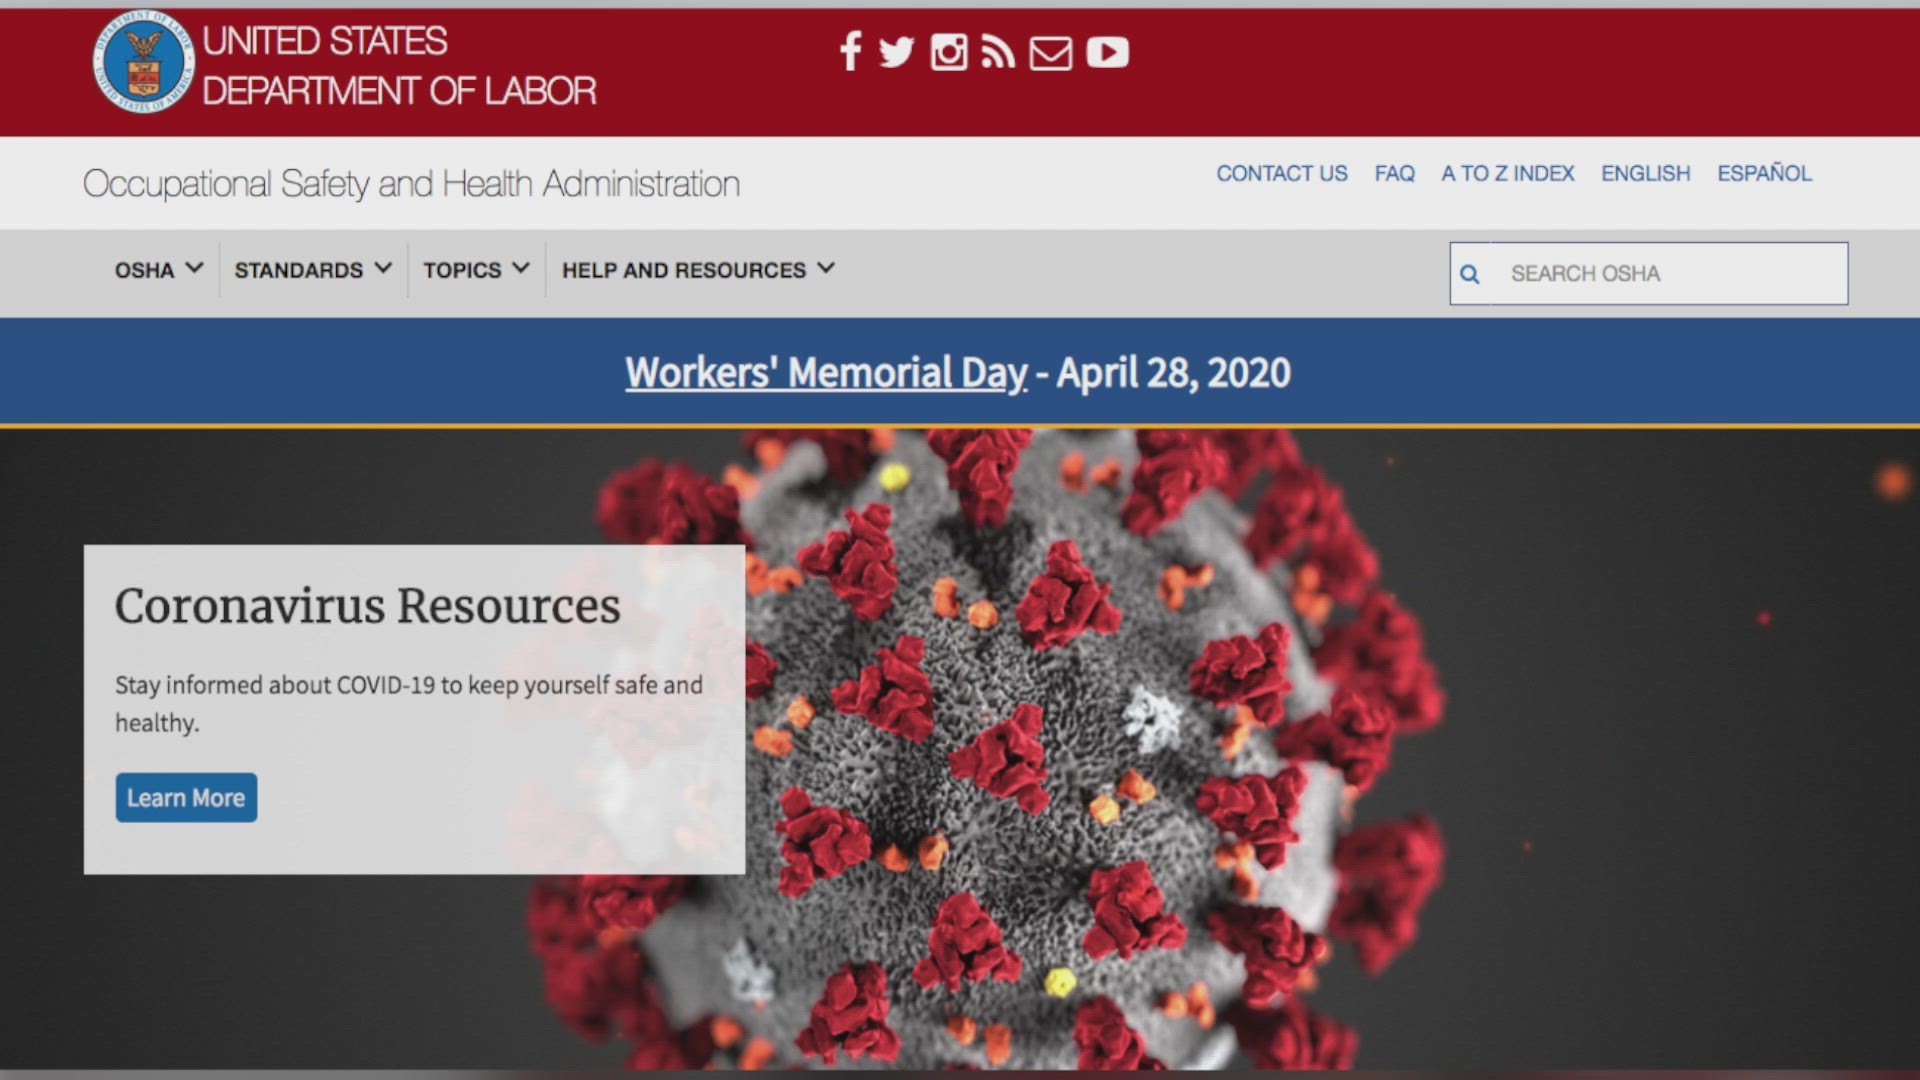 The Occupational Safety and Health Administration is responsible for setting and enforcing workplace health regulations across the country. And according to a new report from USA Today, OSHA is currently investigating close to 200 coronavirus-related cases.